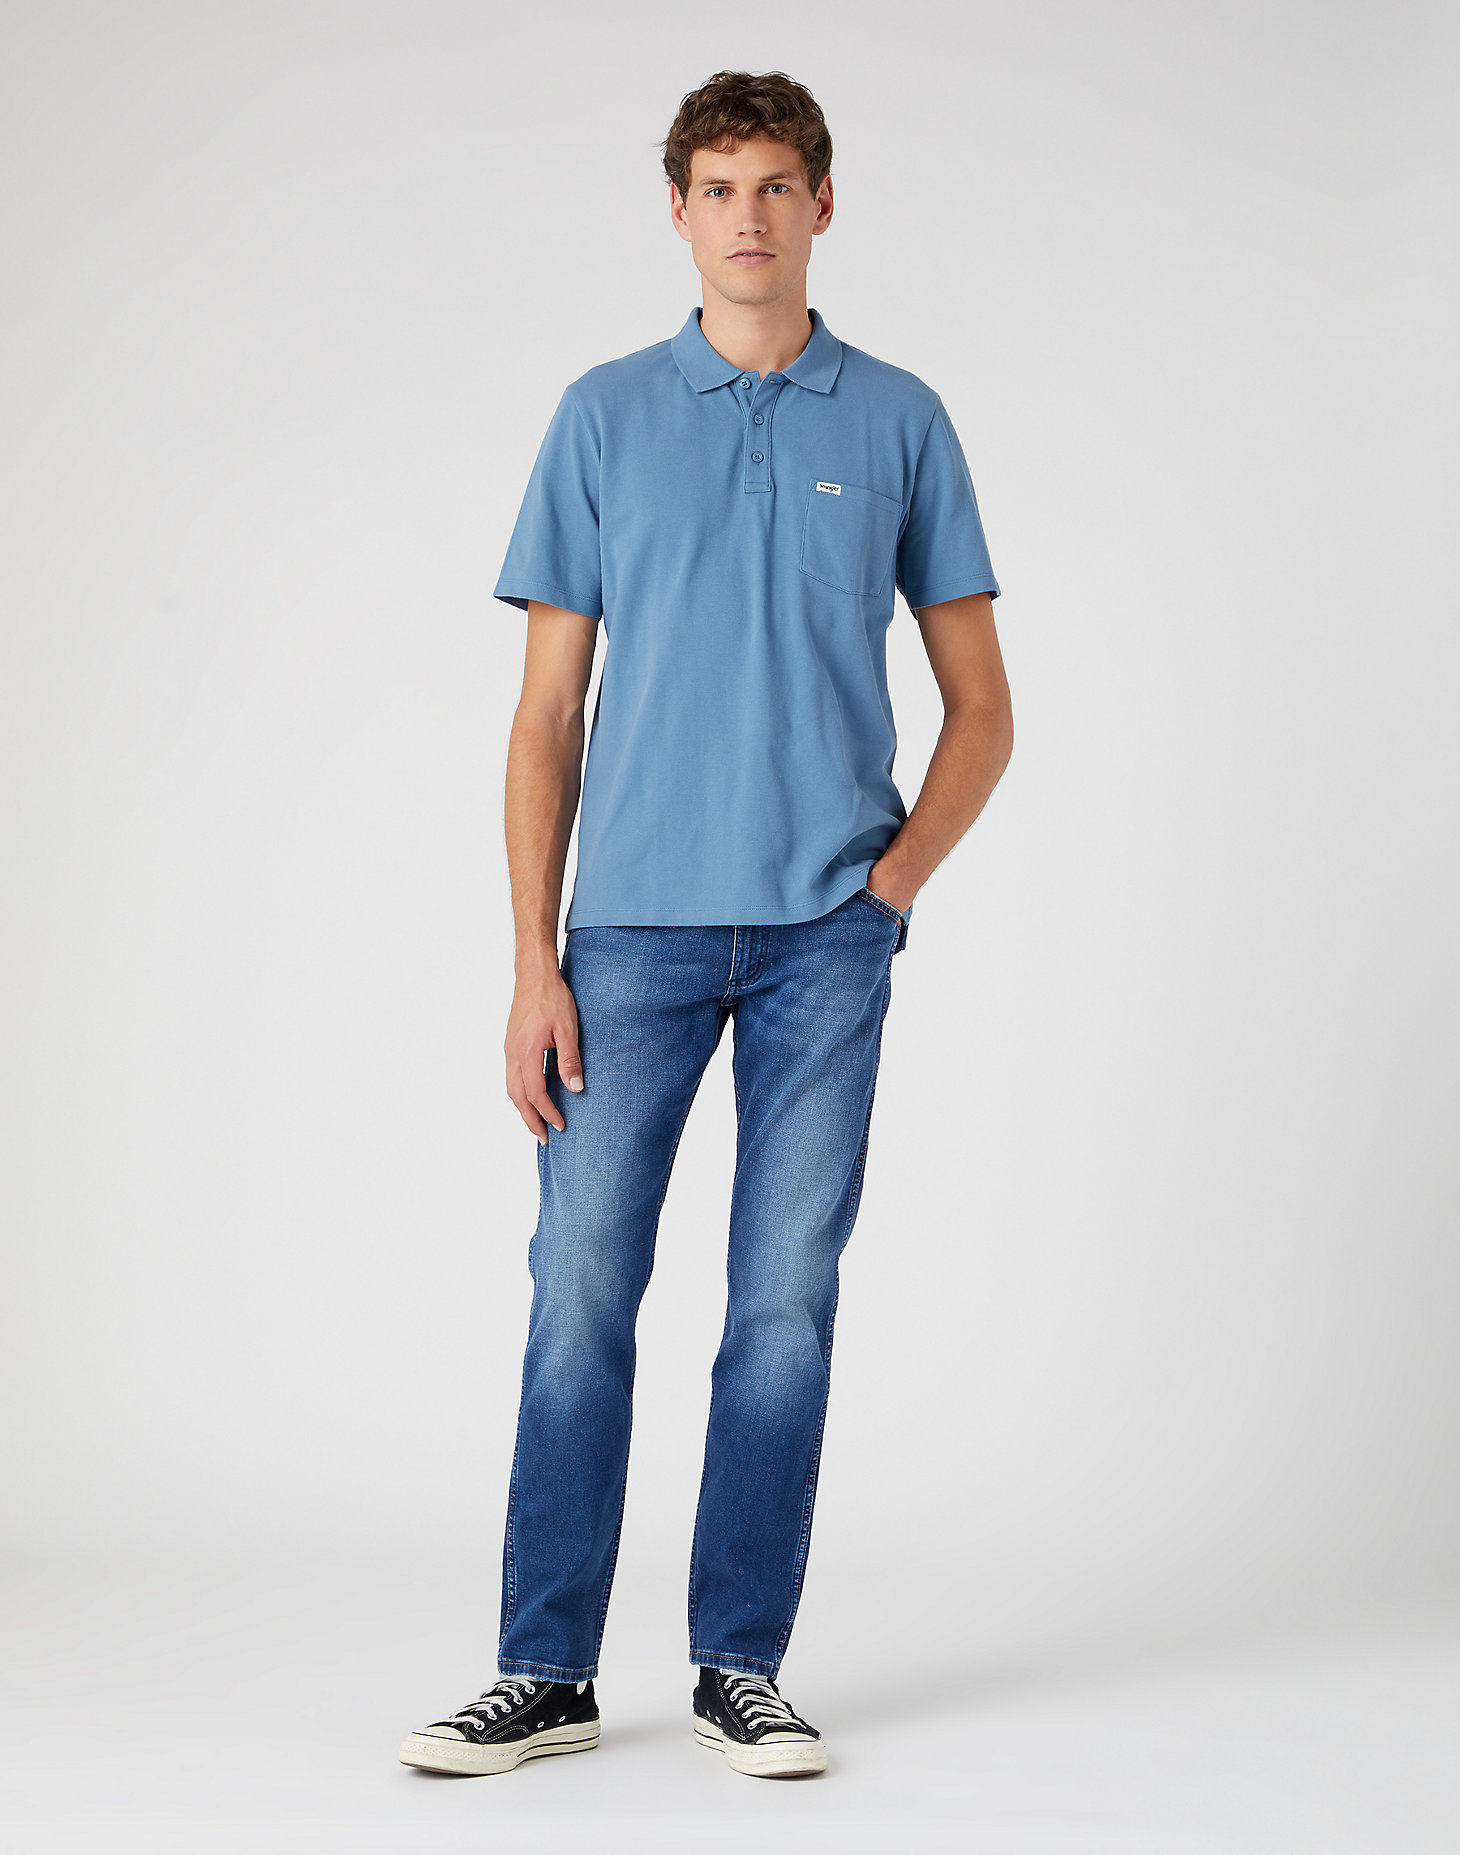 Polo Shirt in Captains Blue alternative view 1